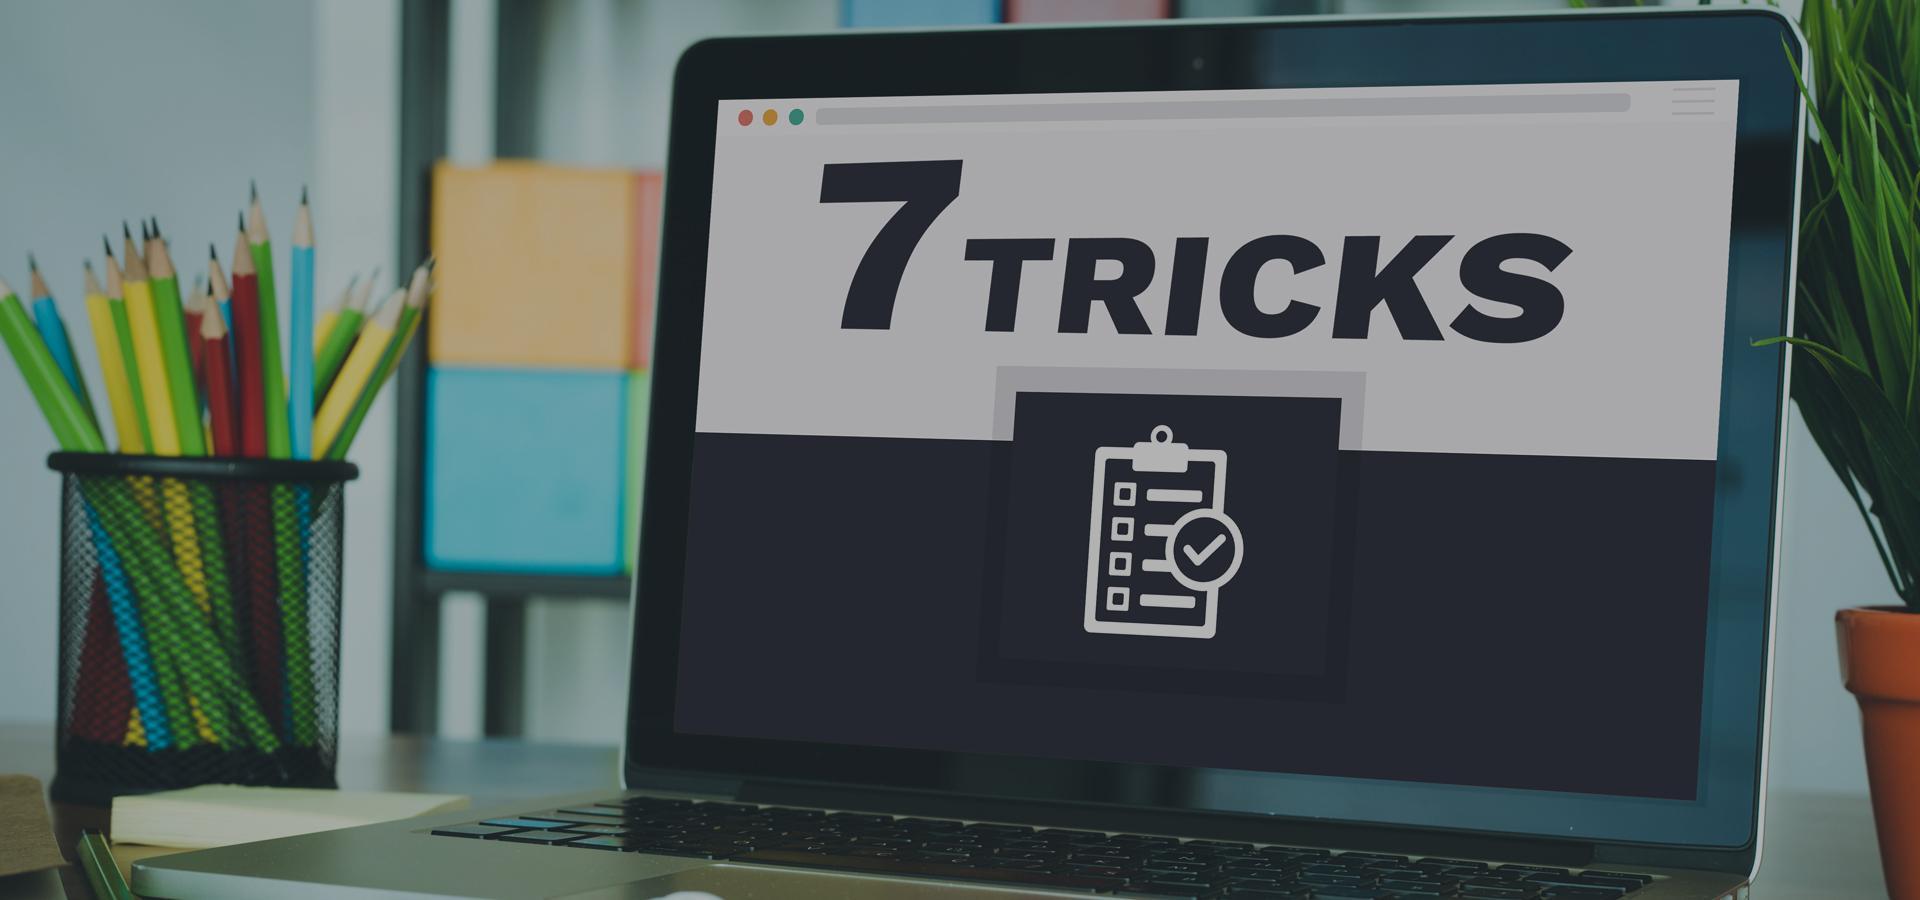 Get the Most out of JExcel with These 7 Tricks